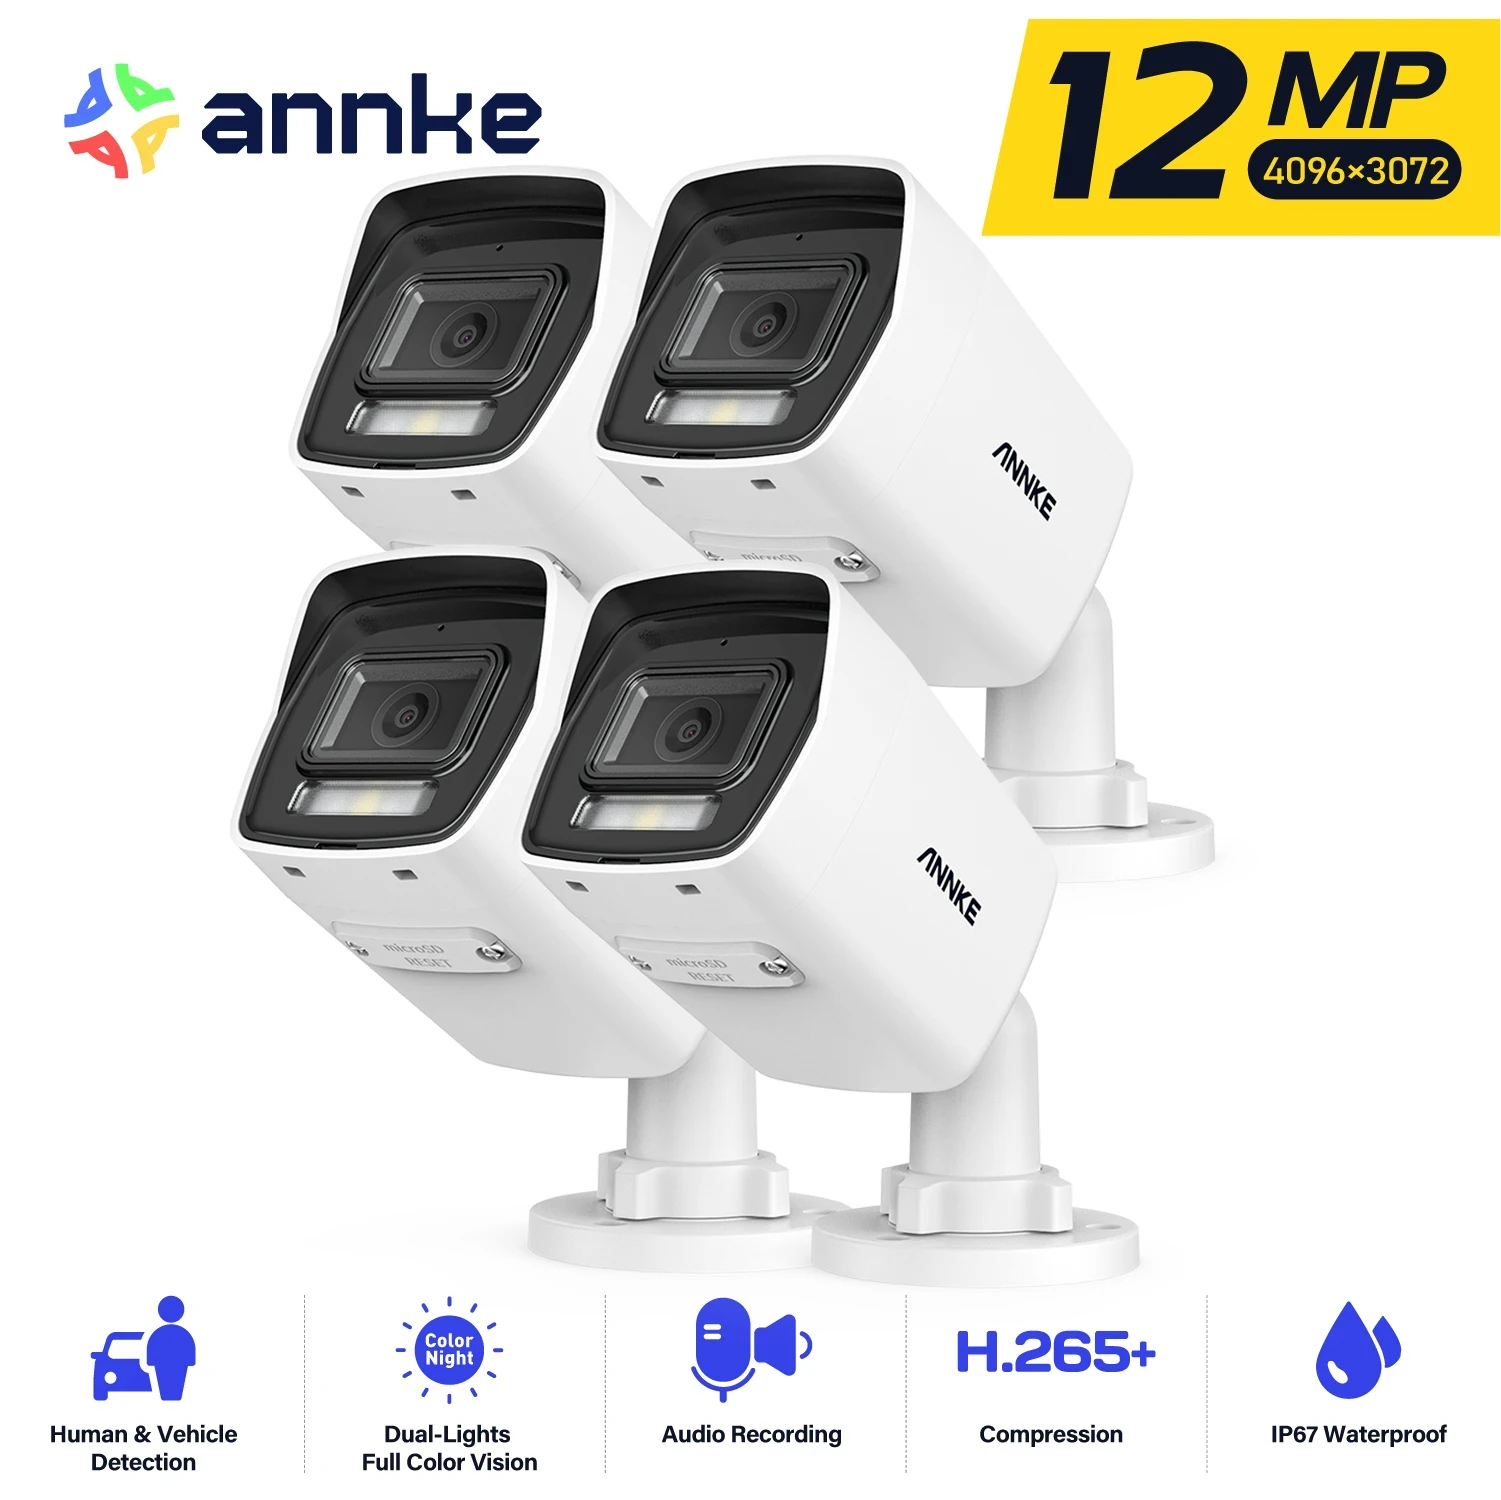 

Annke 6K Dual Light Audio Fixed Bullet Camera Human Vehicle Detection 12MP HD IP Security Camera Poe 256G SD Storage ONVIF IP67